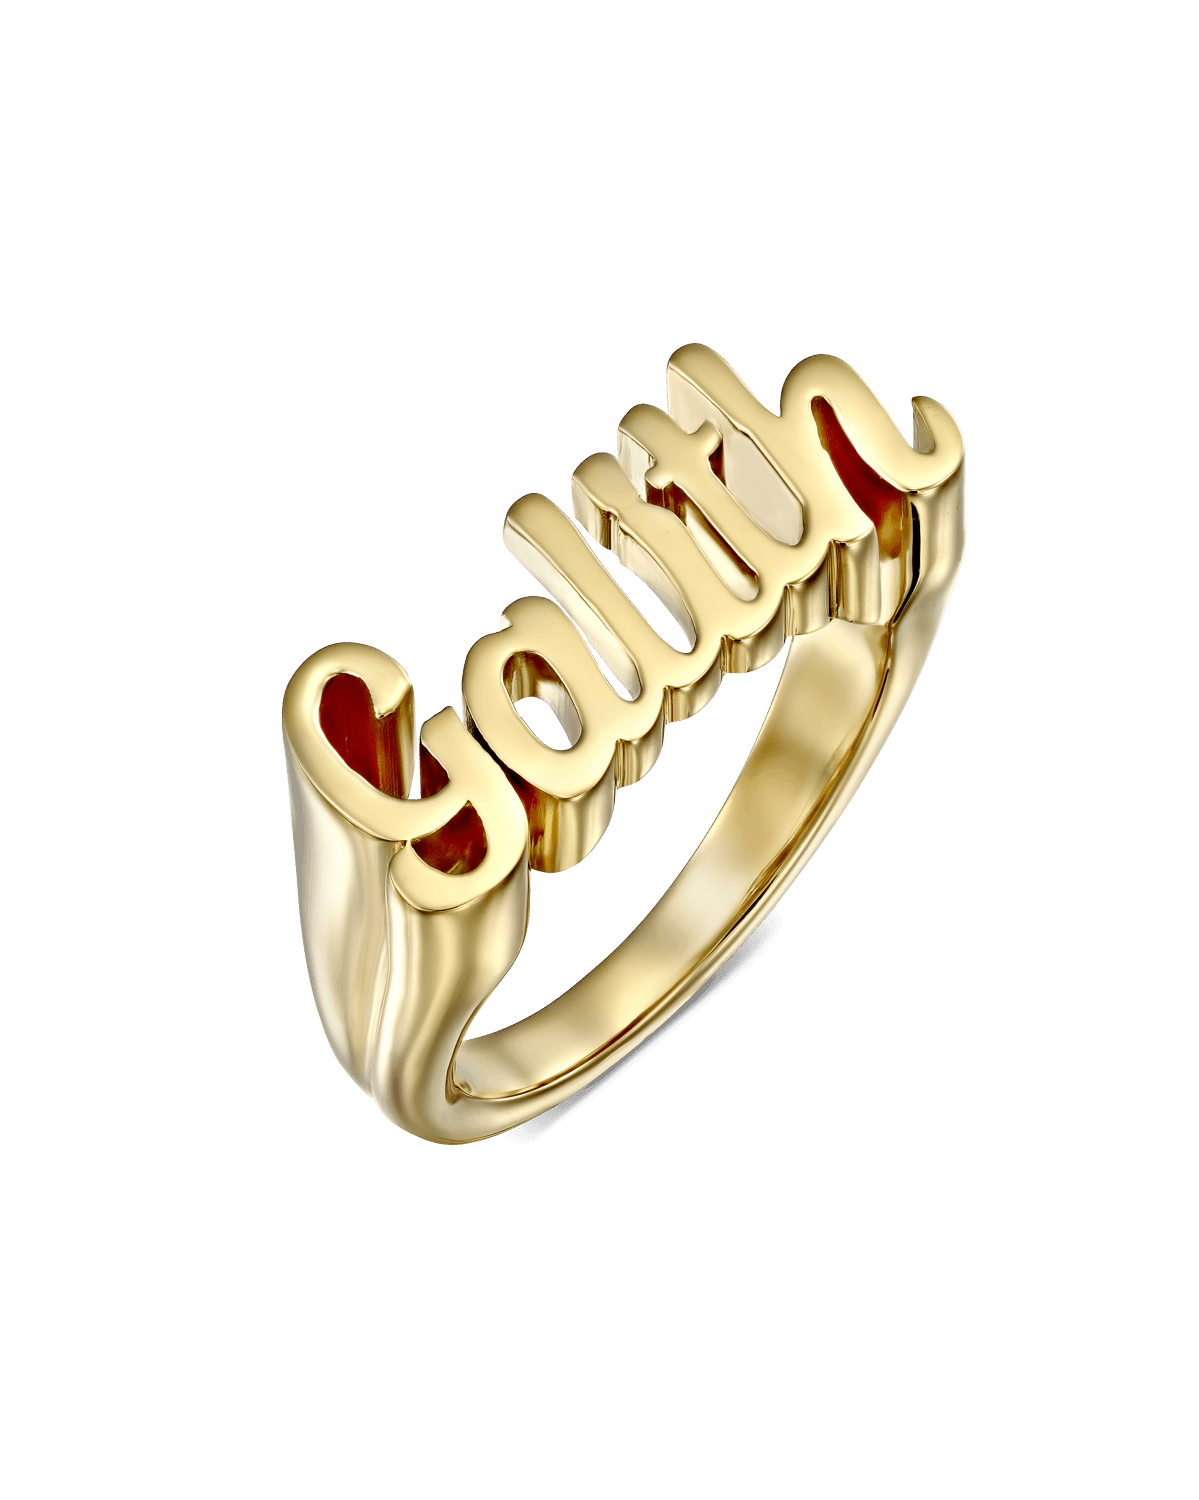 Buy customized - Personalized Double Name Ring Two Name Ring Custom Name  Ring with Any Names Mother Daughter Ring Gift at Amazon.in